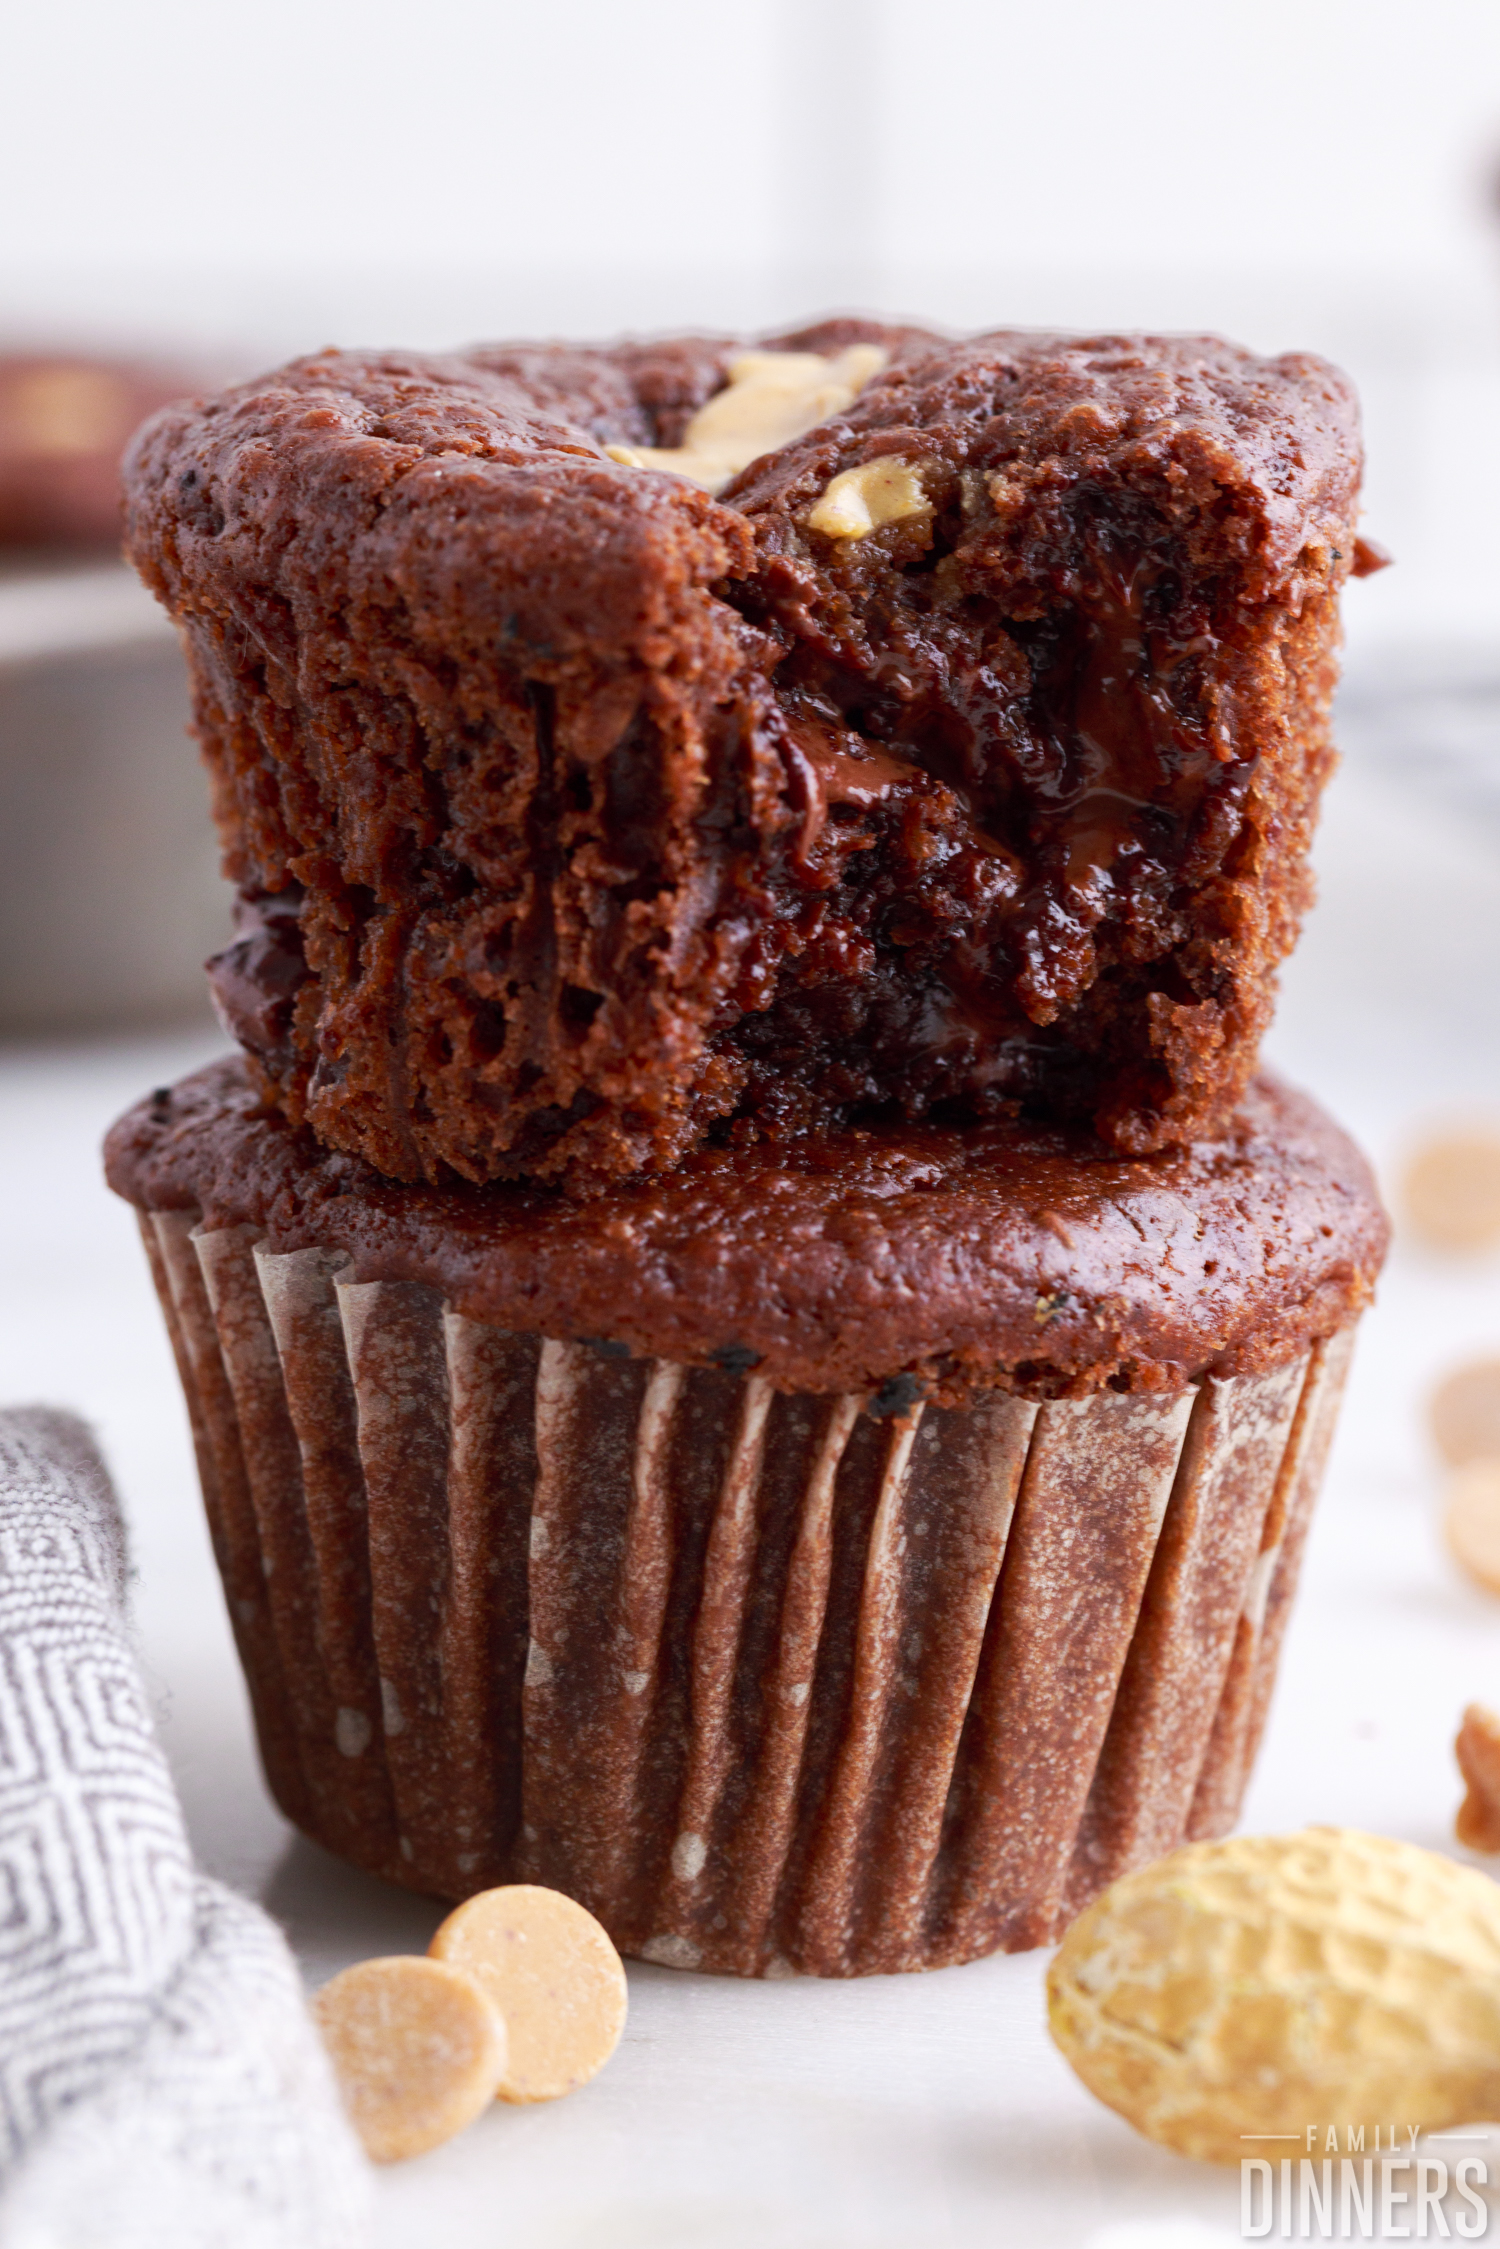 two chocolate peanut butter muffins stacked on top of each other, top one has a bite taken out of it